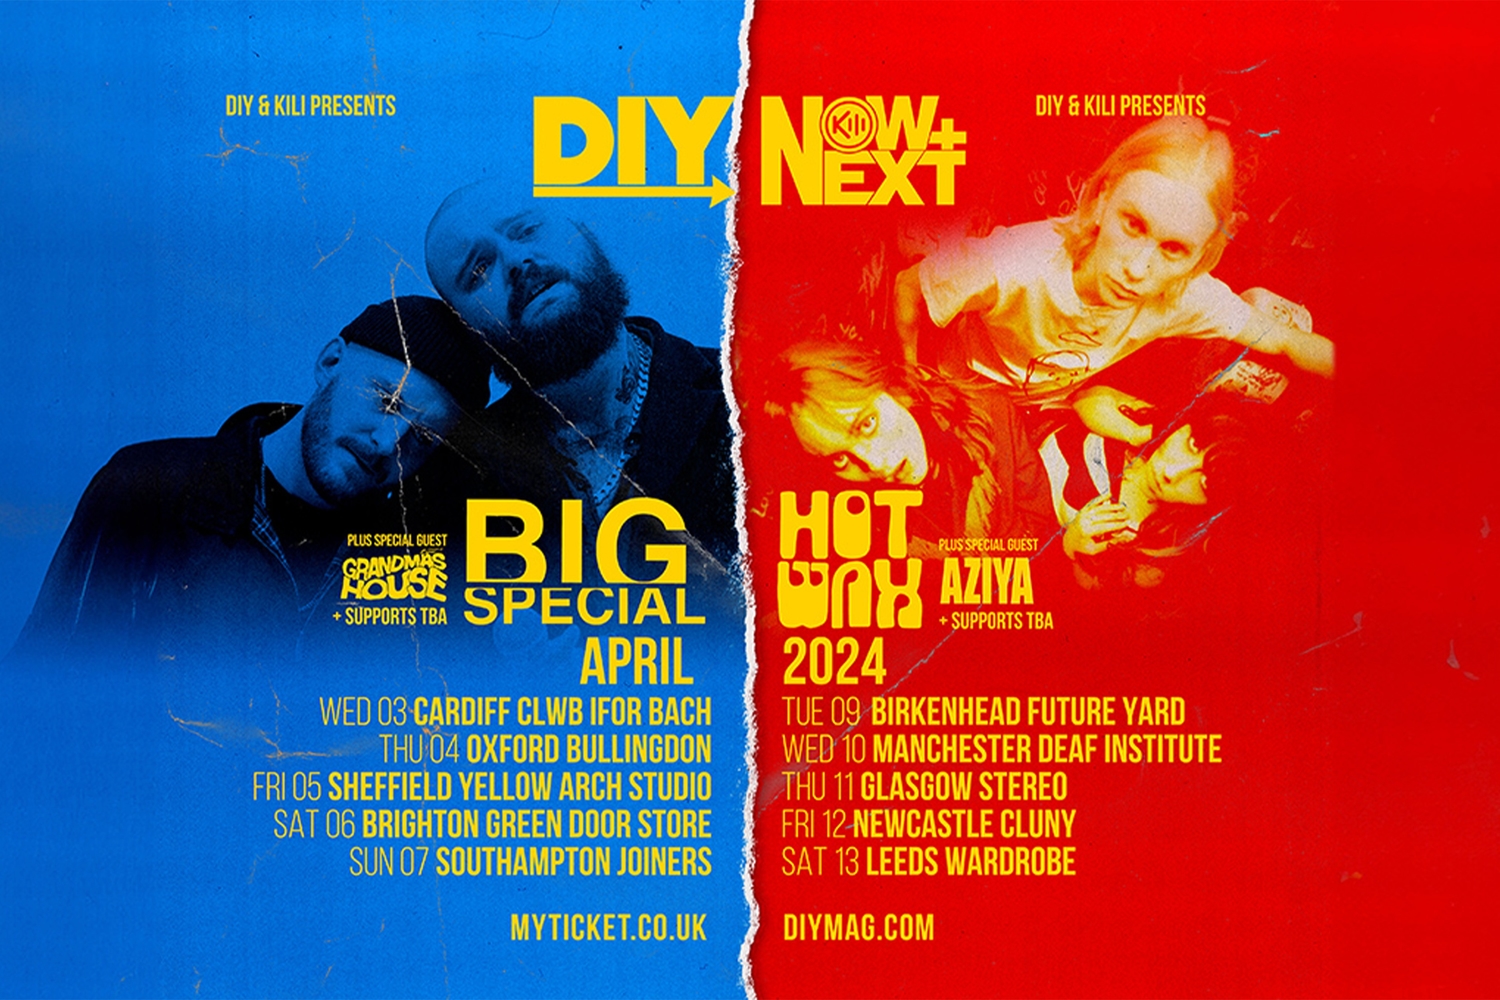 HotWax and Big Special to headline DIY's Now & Next Tour 2024